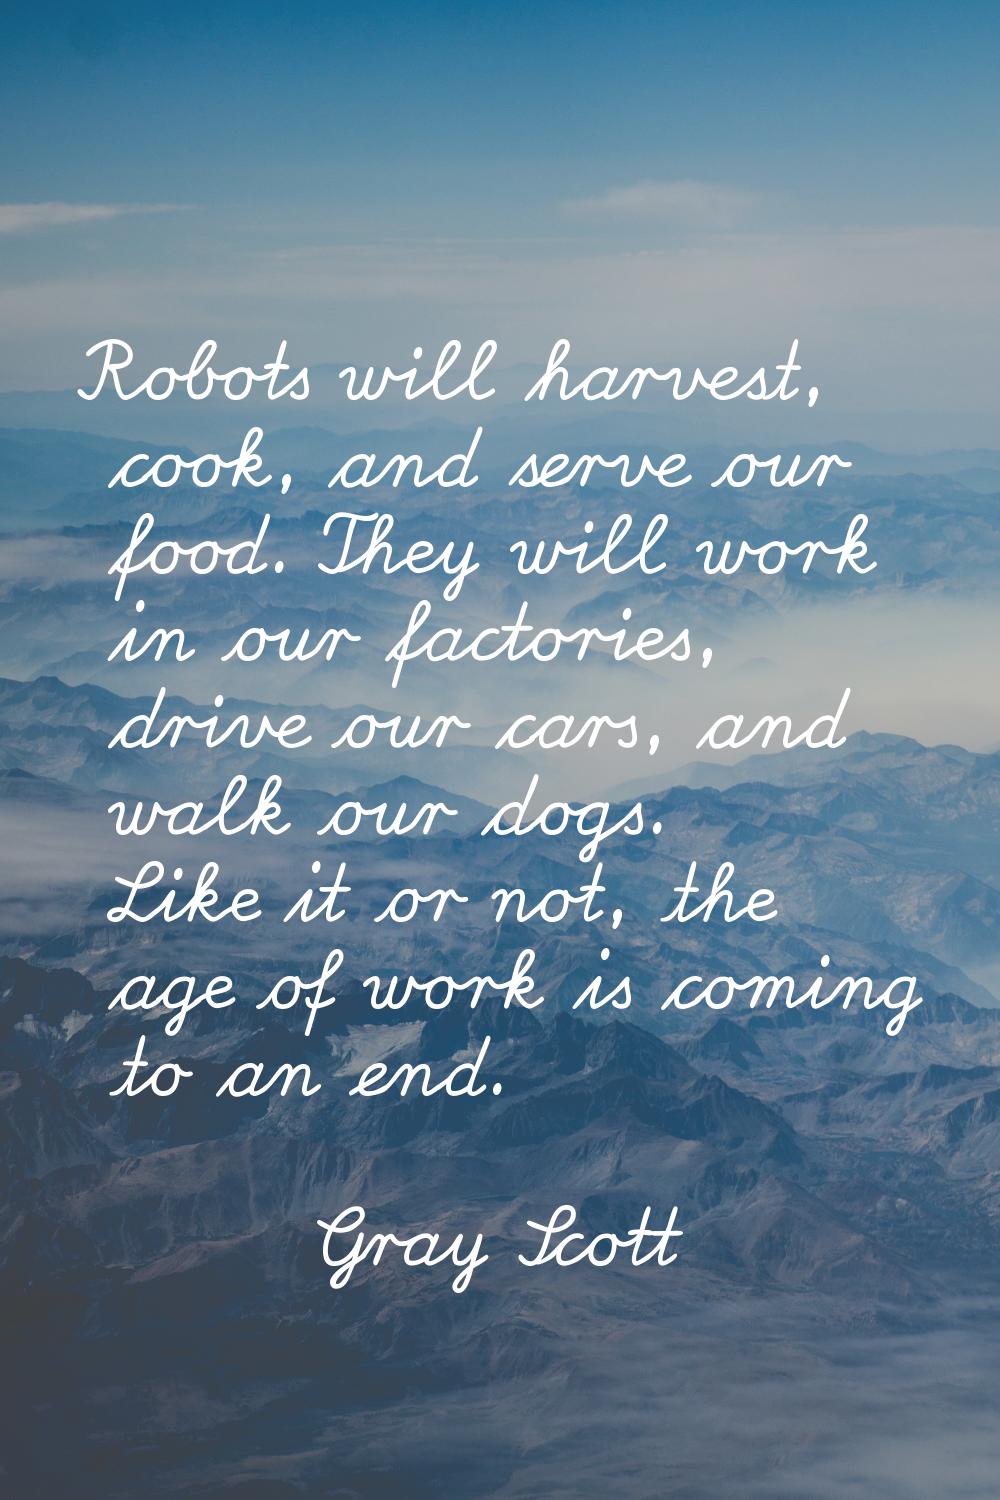 Robots will harvest, cook, and serve our food. They will work in our factories, drive our cars, and